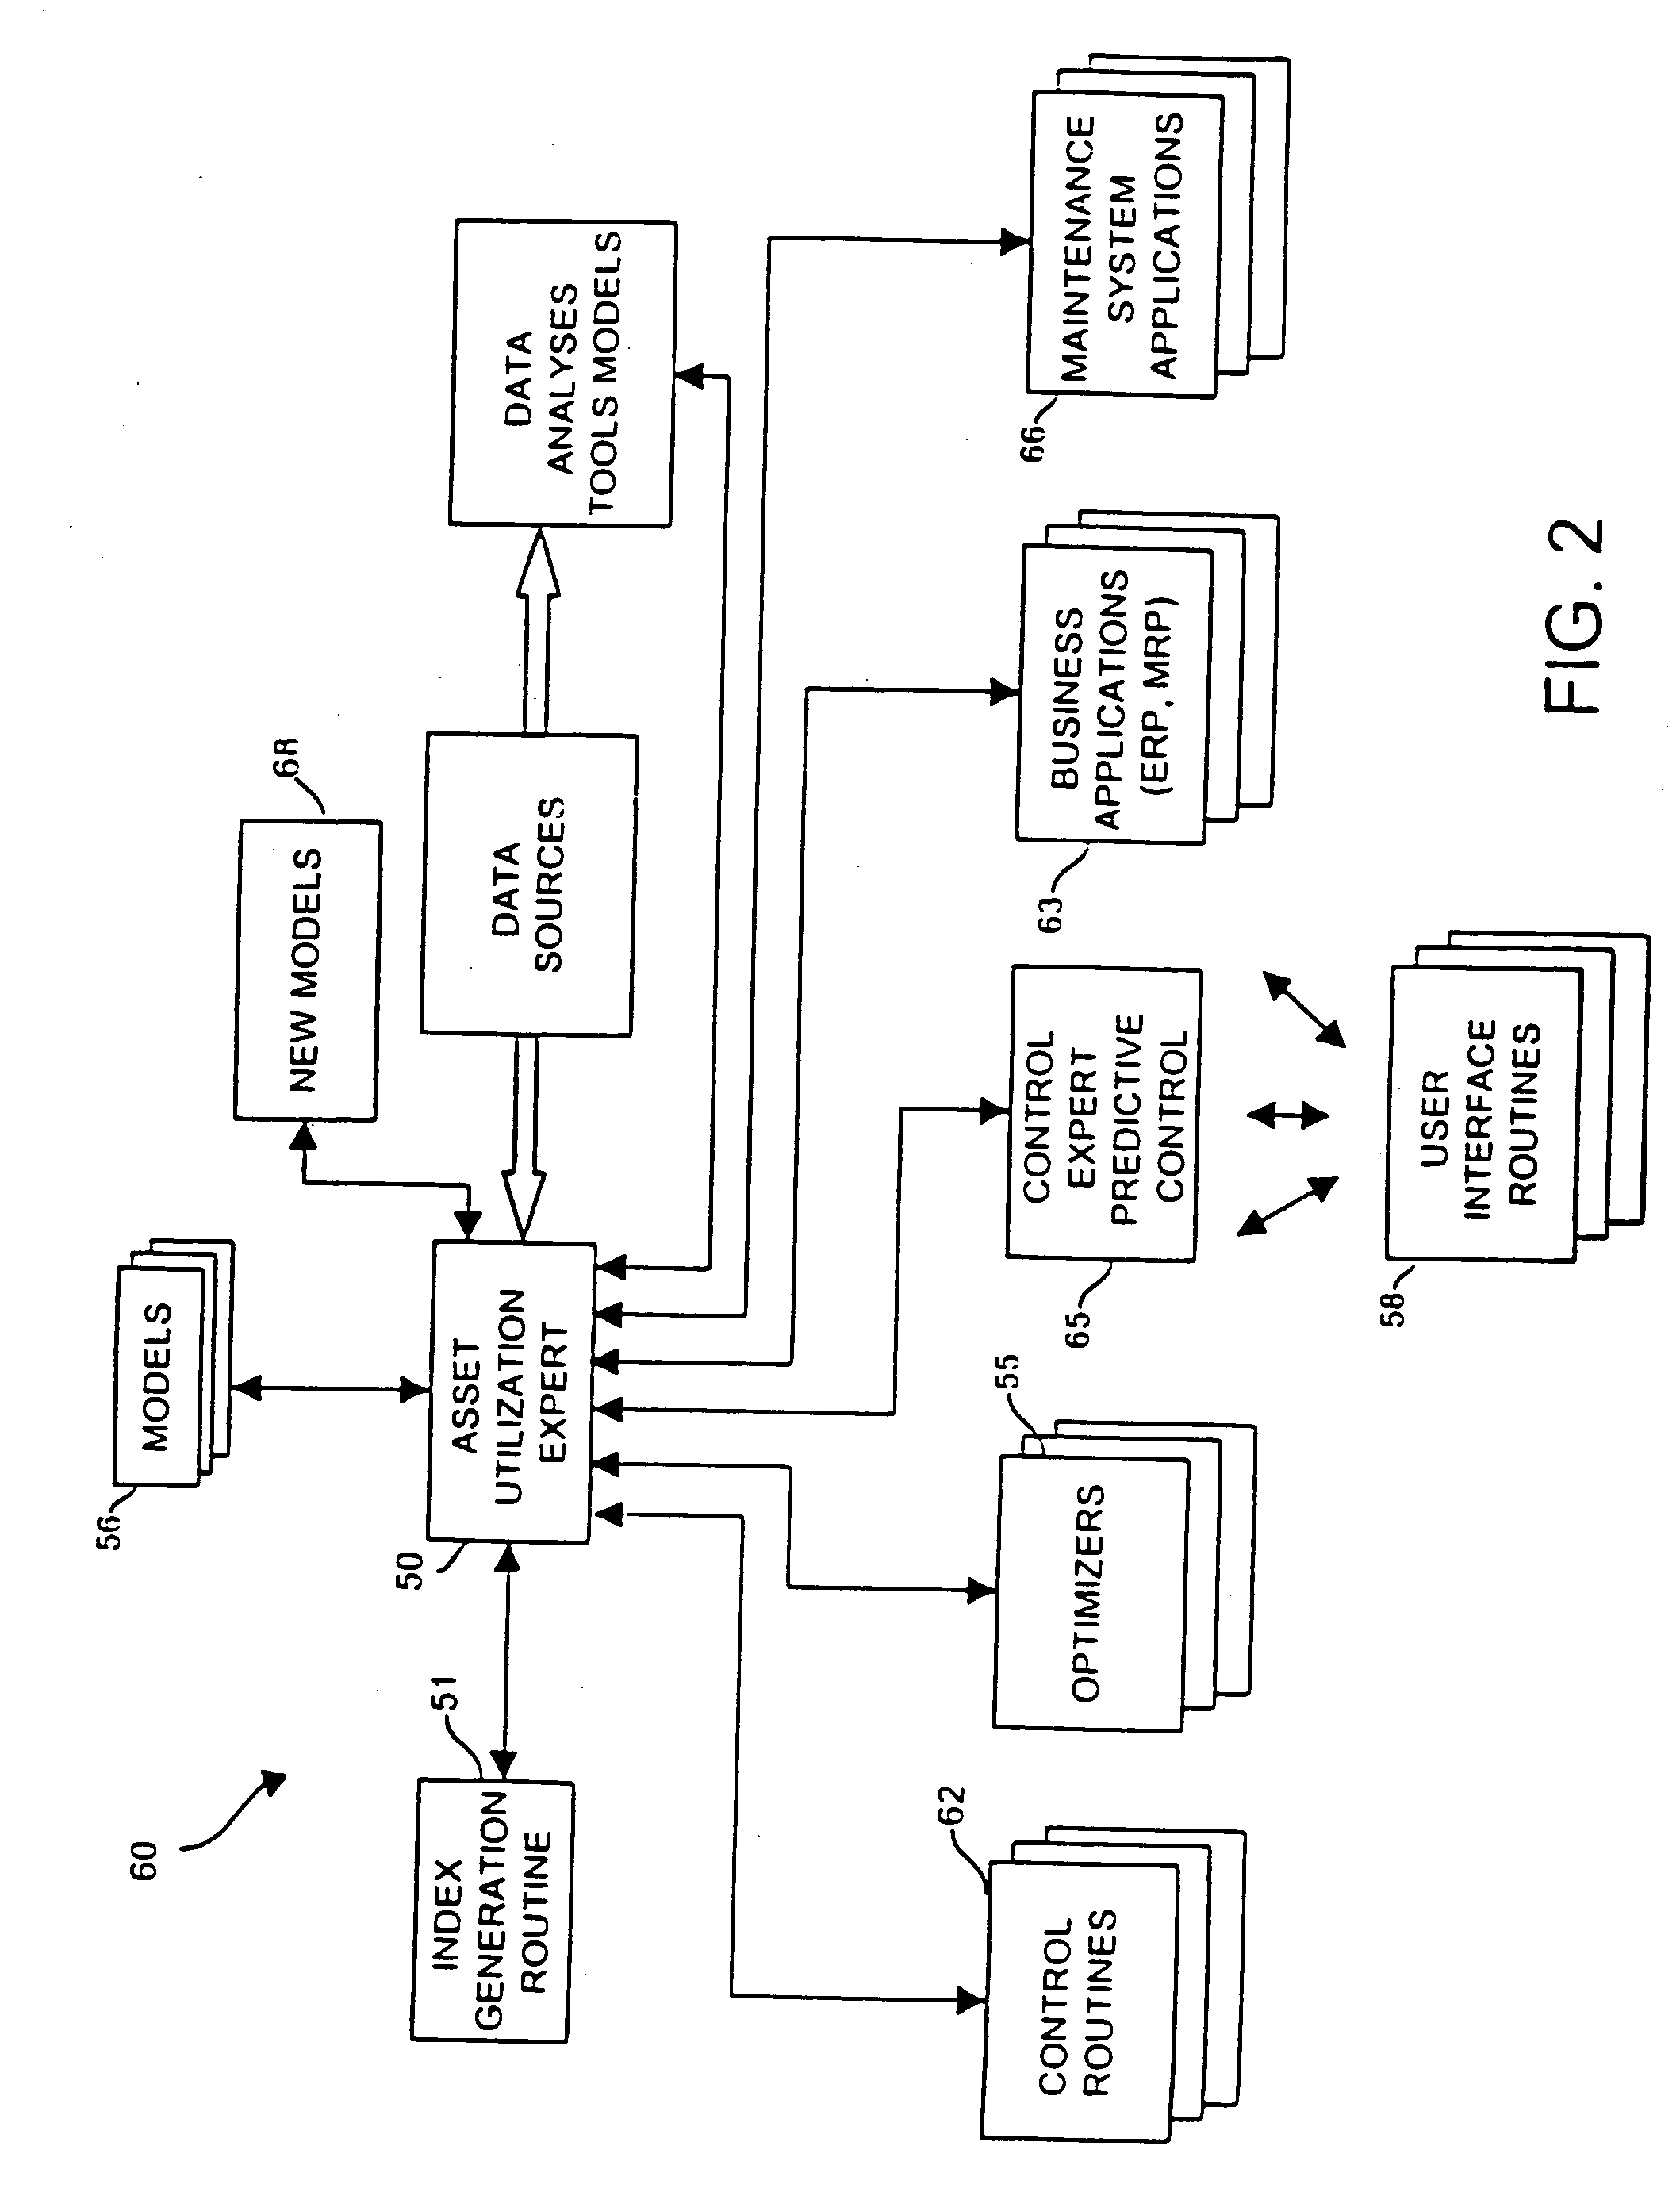 Creation and display of indices within a process plant